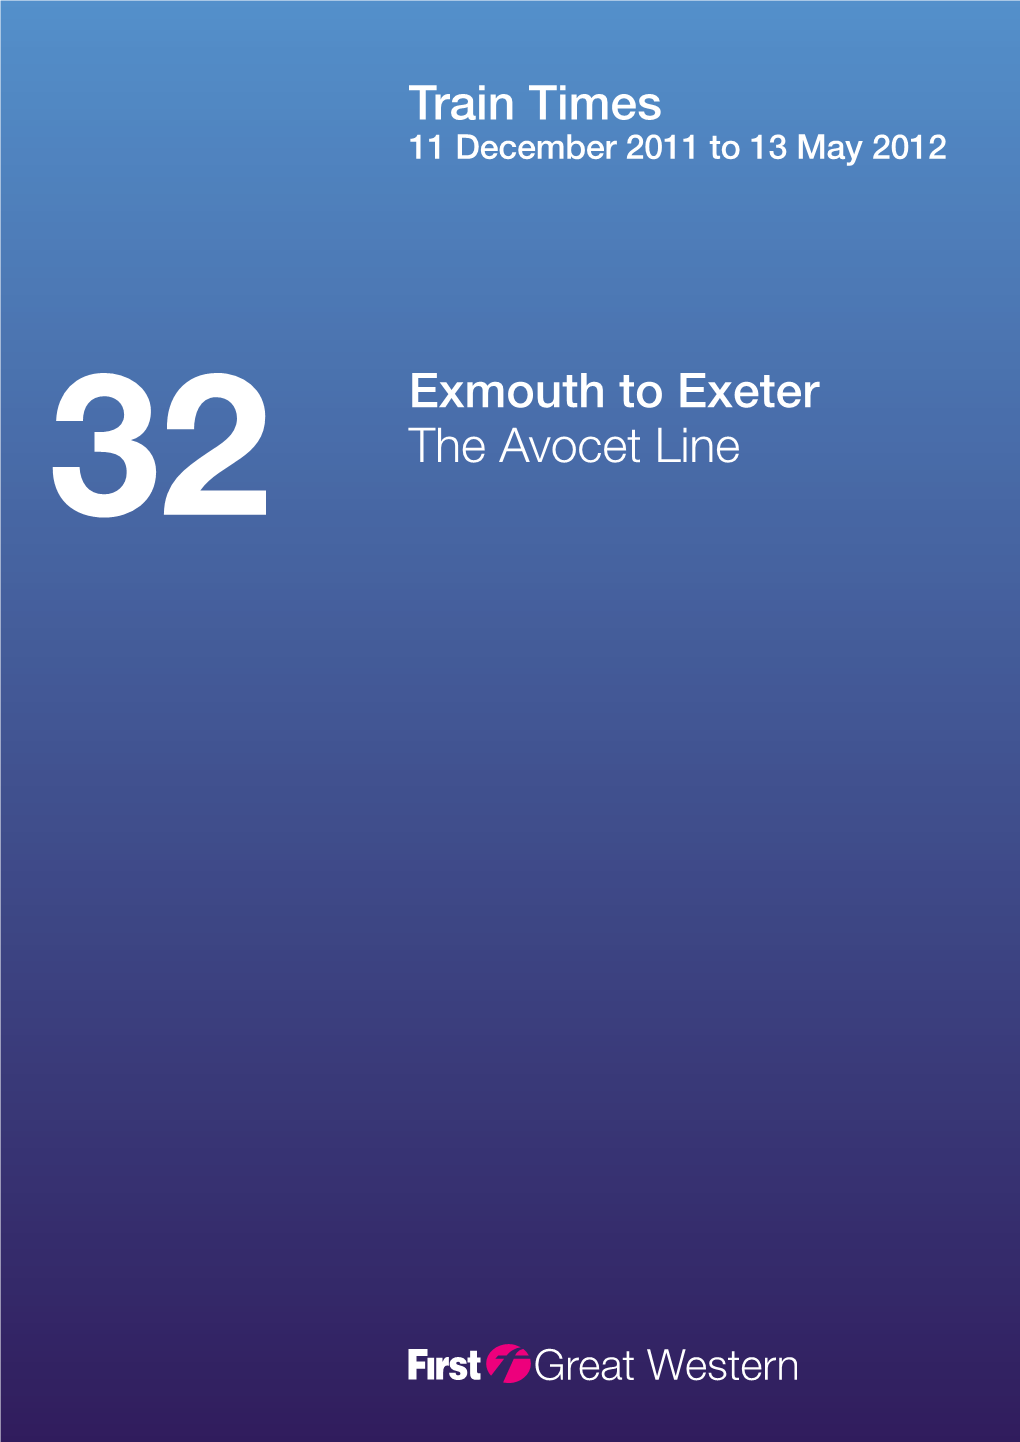 Exmouth to Exeter the Avocet Line Train Times